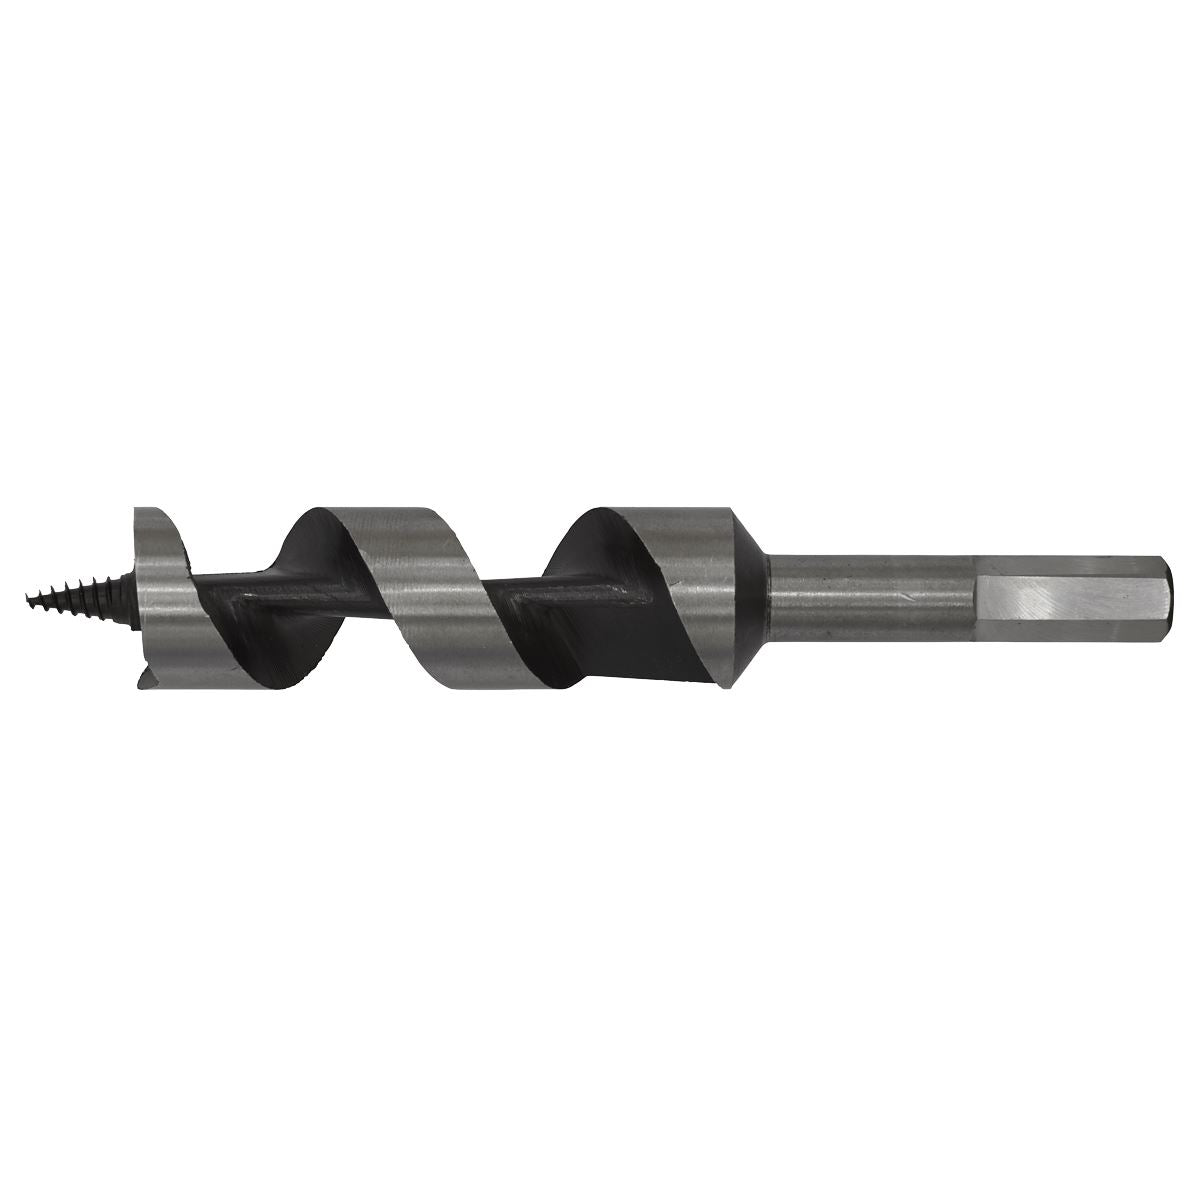 Worksafe by Sealey Auger Wood Drill Bit 25mm x 155mm